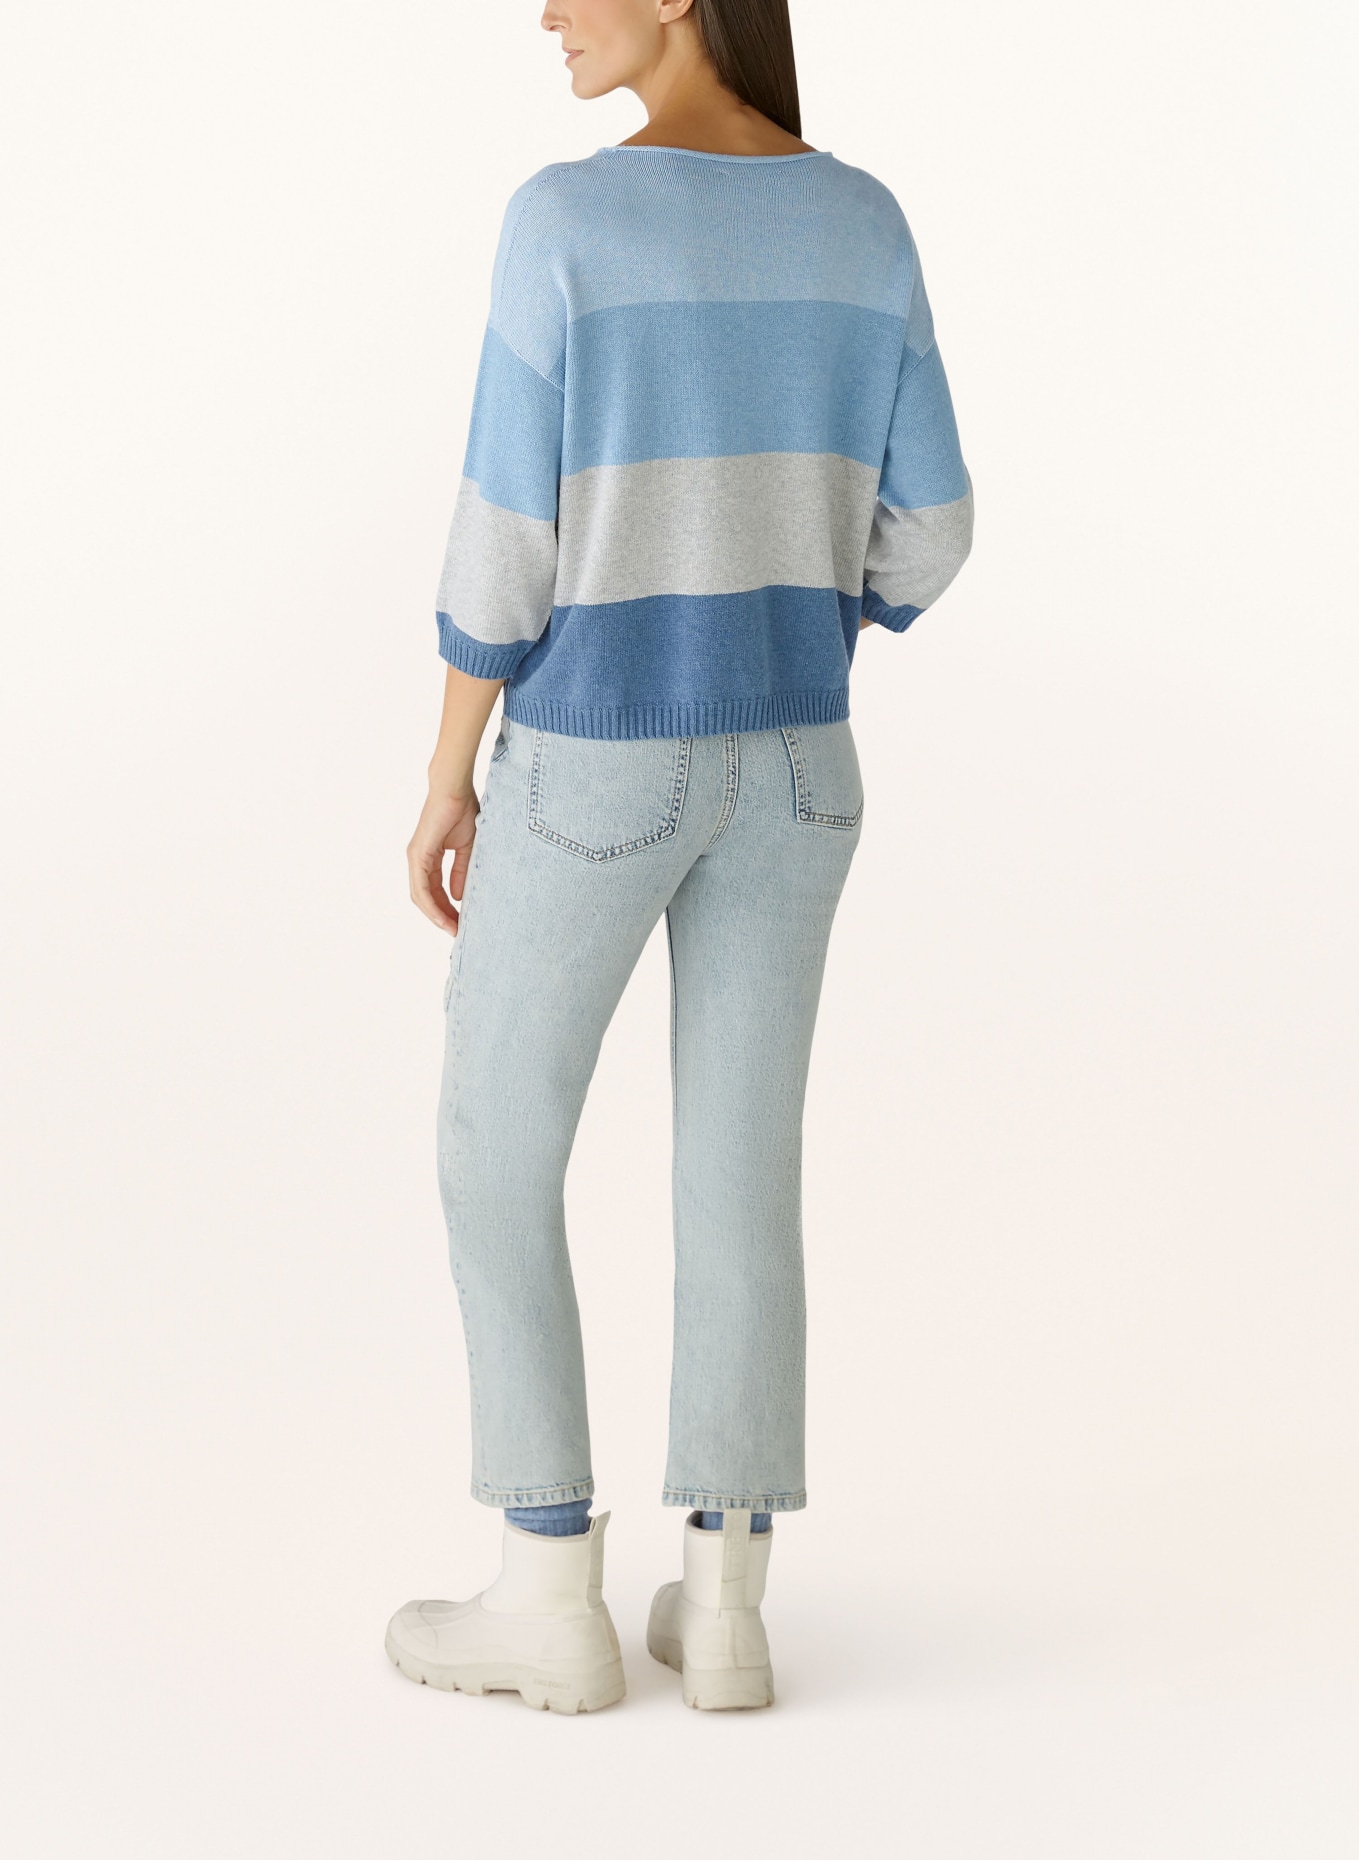 oui Sweater with 3/4 sleeves, Color: LIGHT BLUE/ BLUE/ LIGHT GRAY (Image 3)